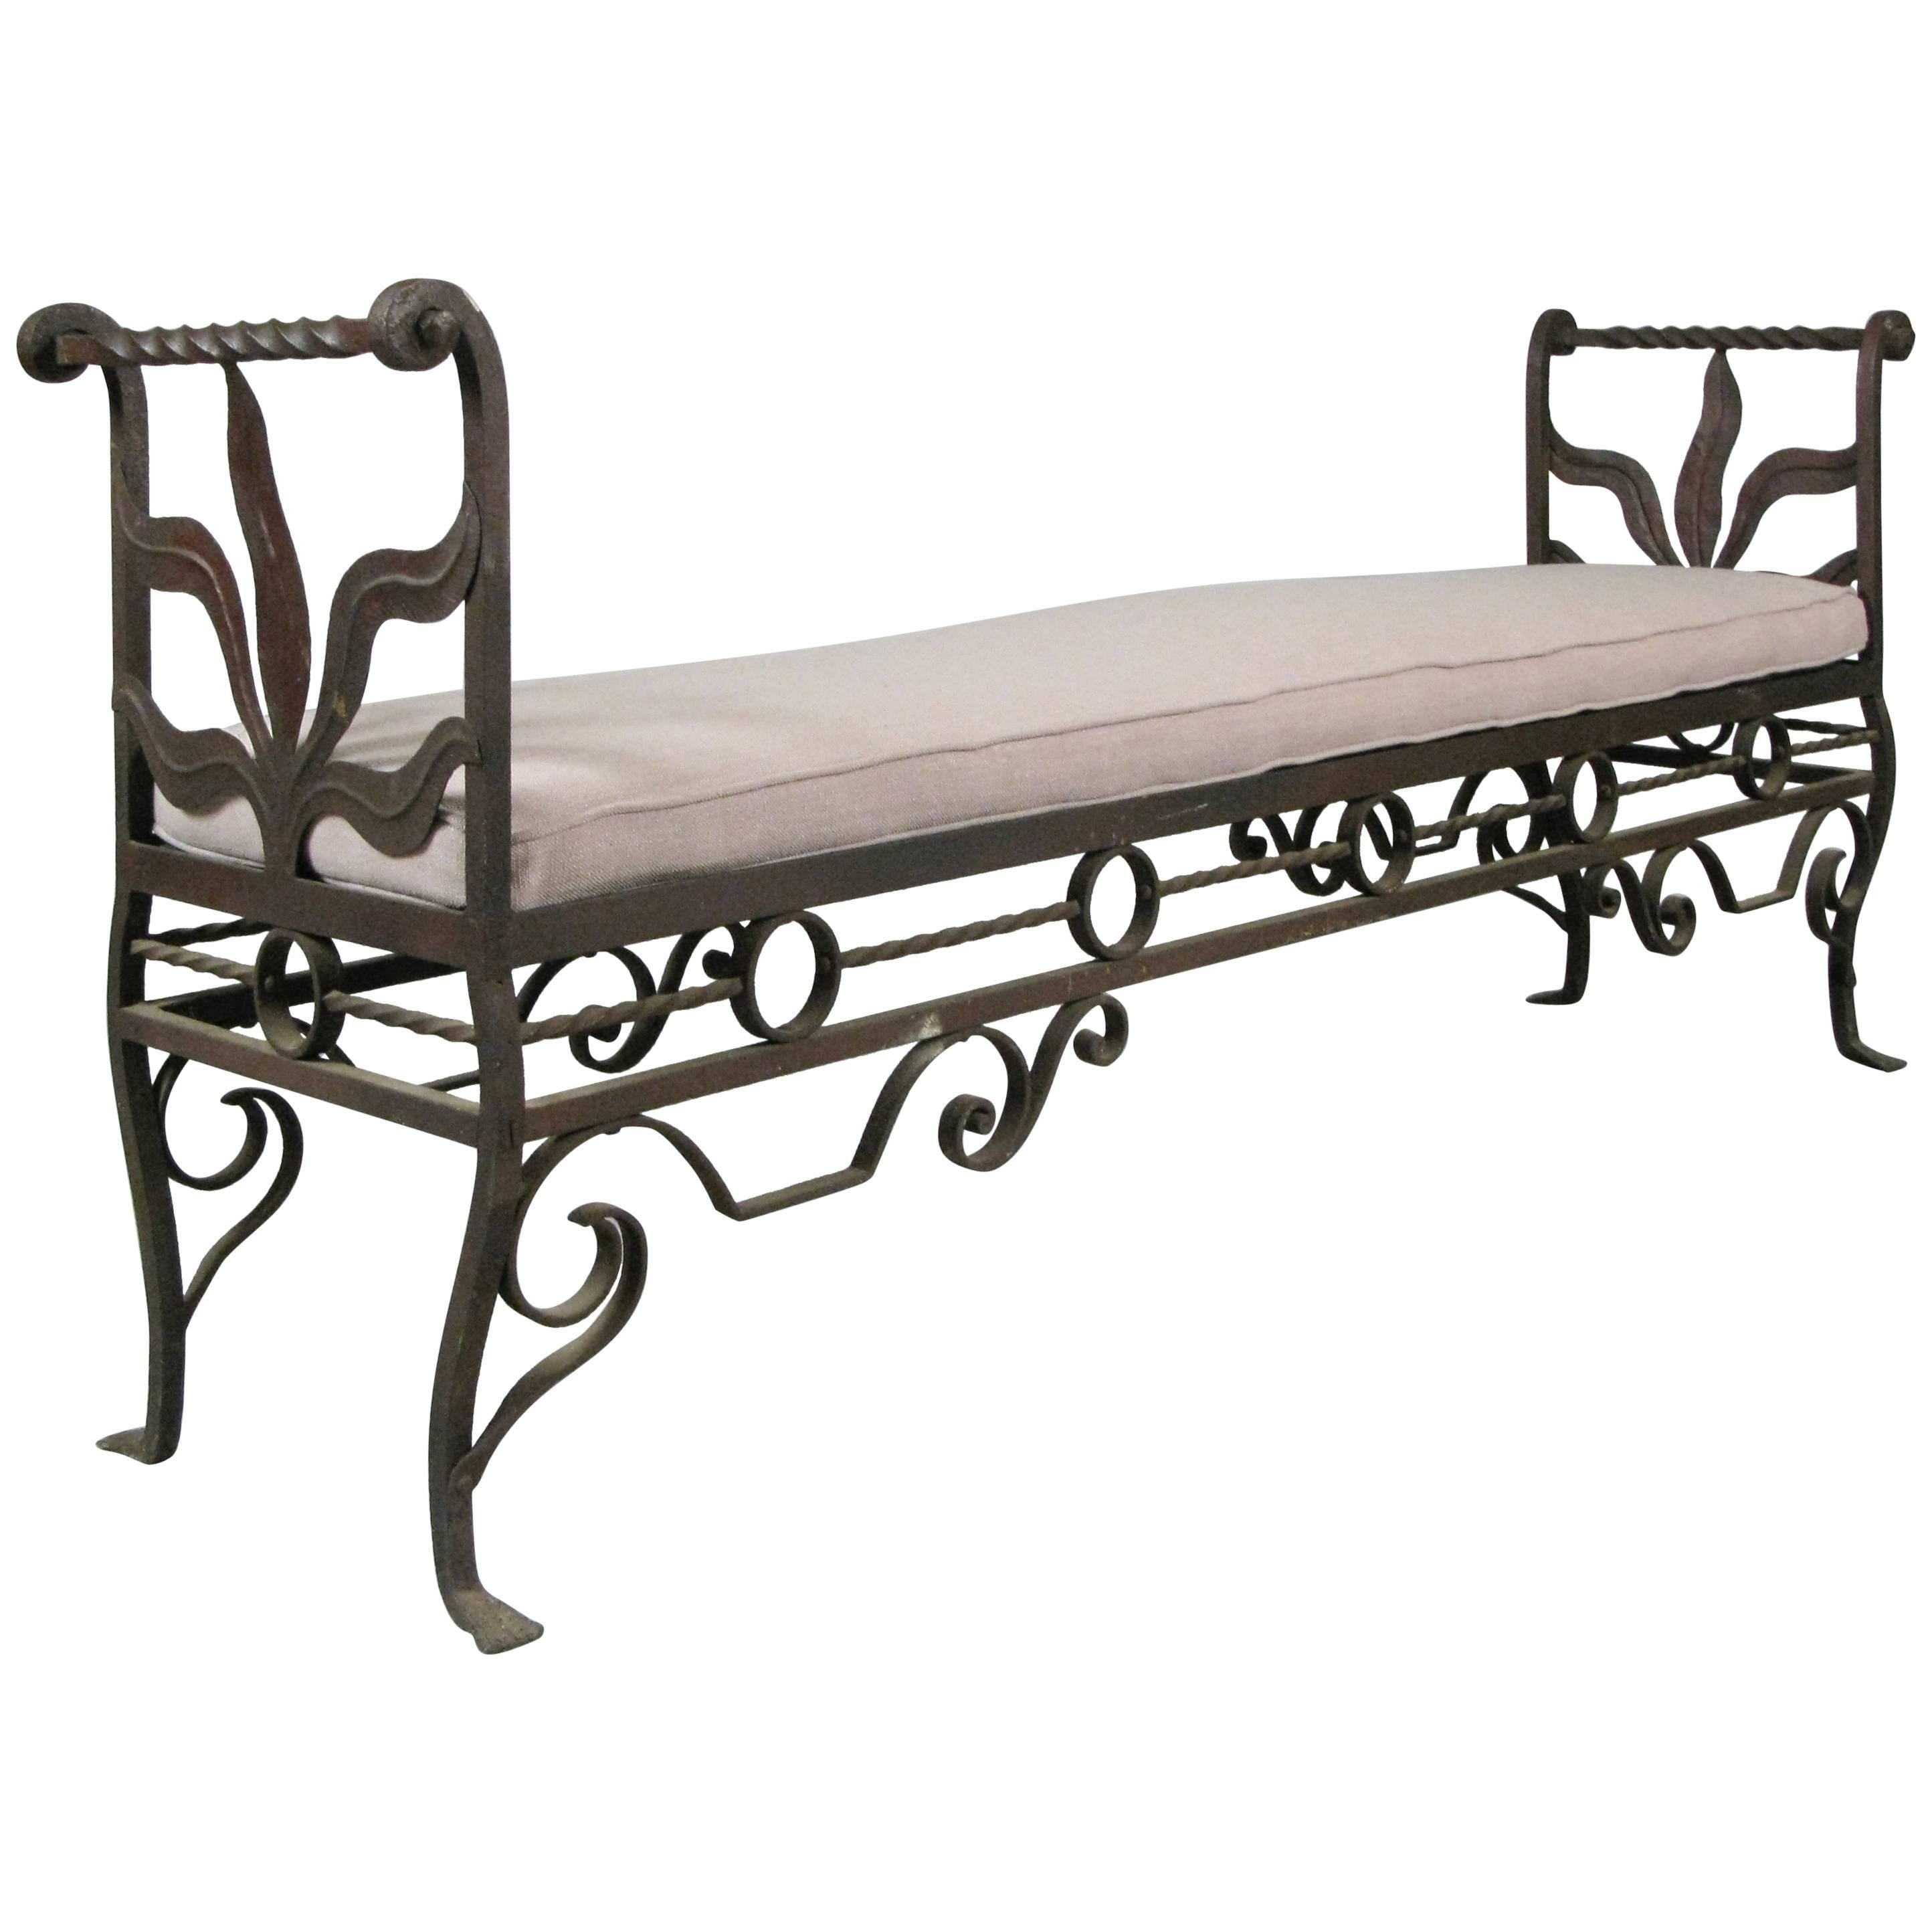 Antique 1920s Wrought Iron Bench